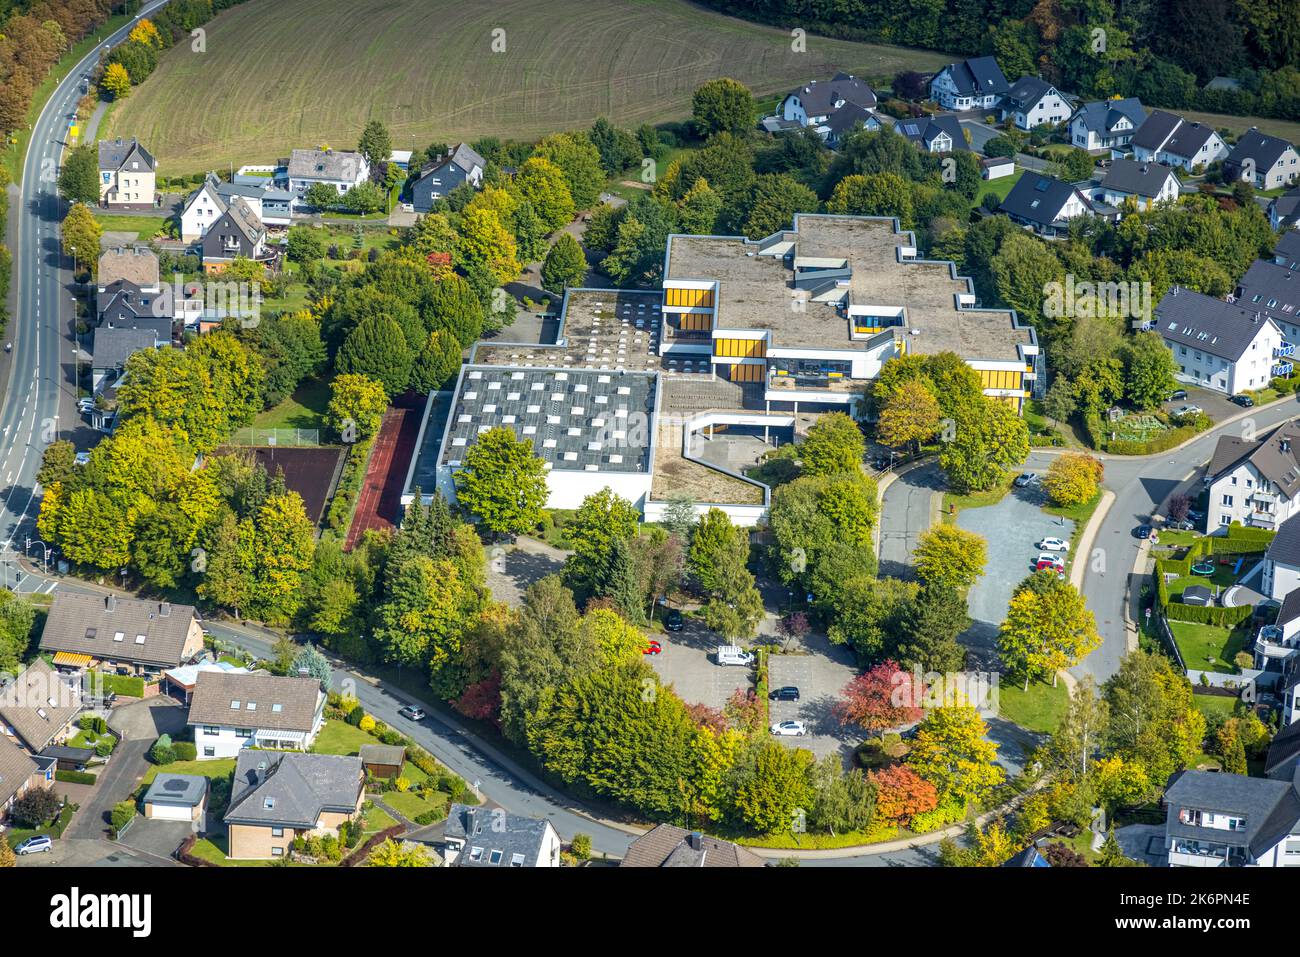 Aerial view, school center Franz Hoffmeister, educational academy for therapy professions, Ostwig, Bestwig, Ruhr area, North Rhine-Westphalia, Germany Stock Photo